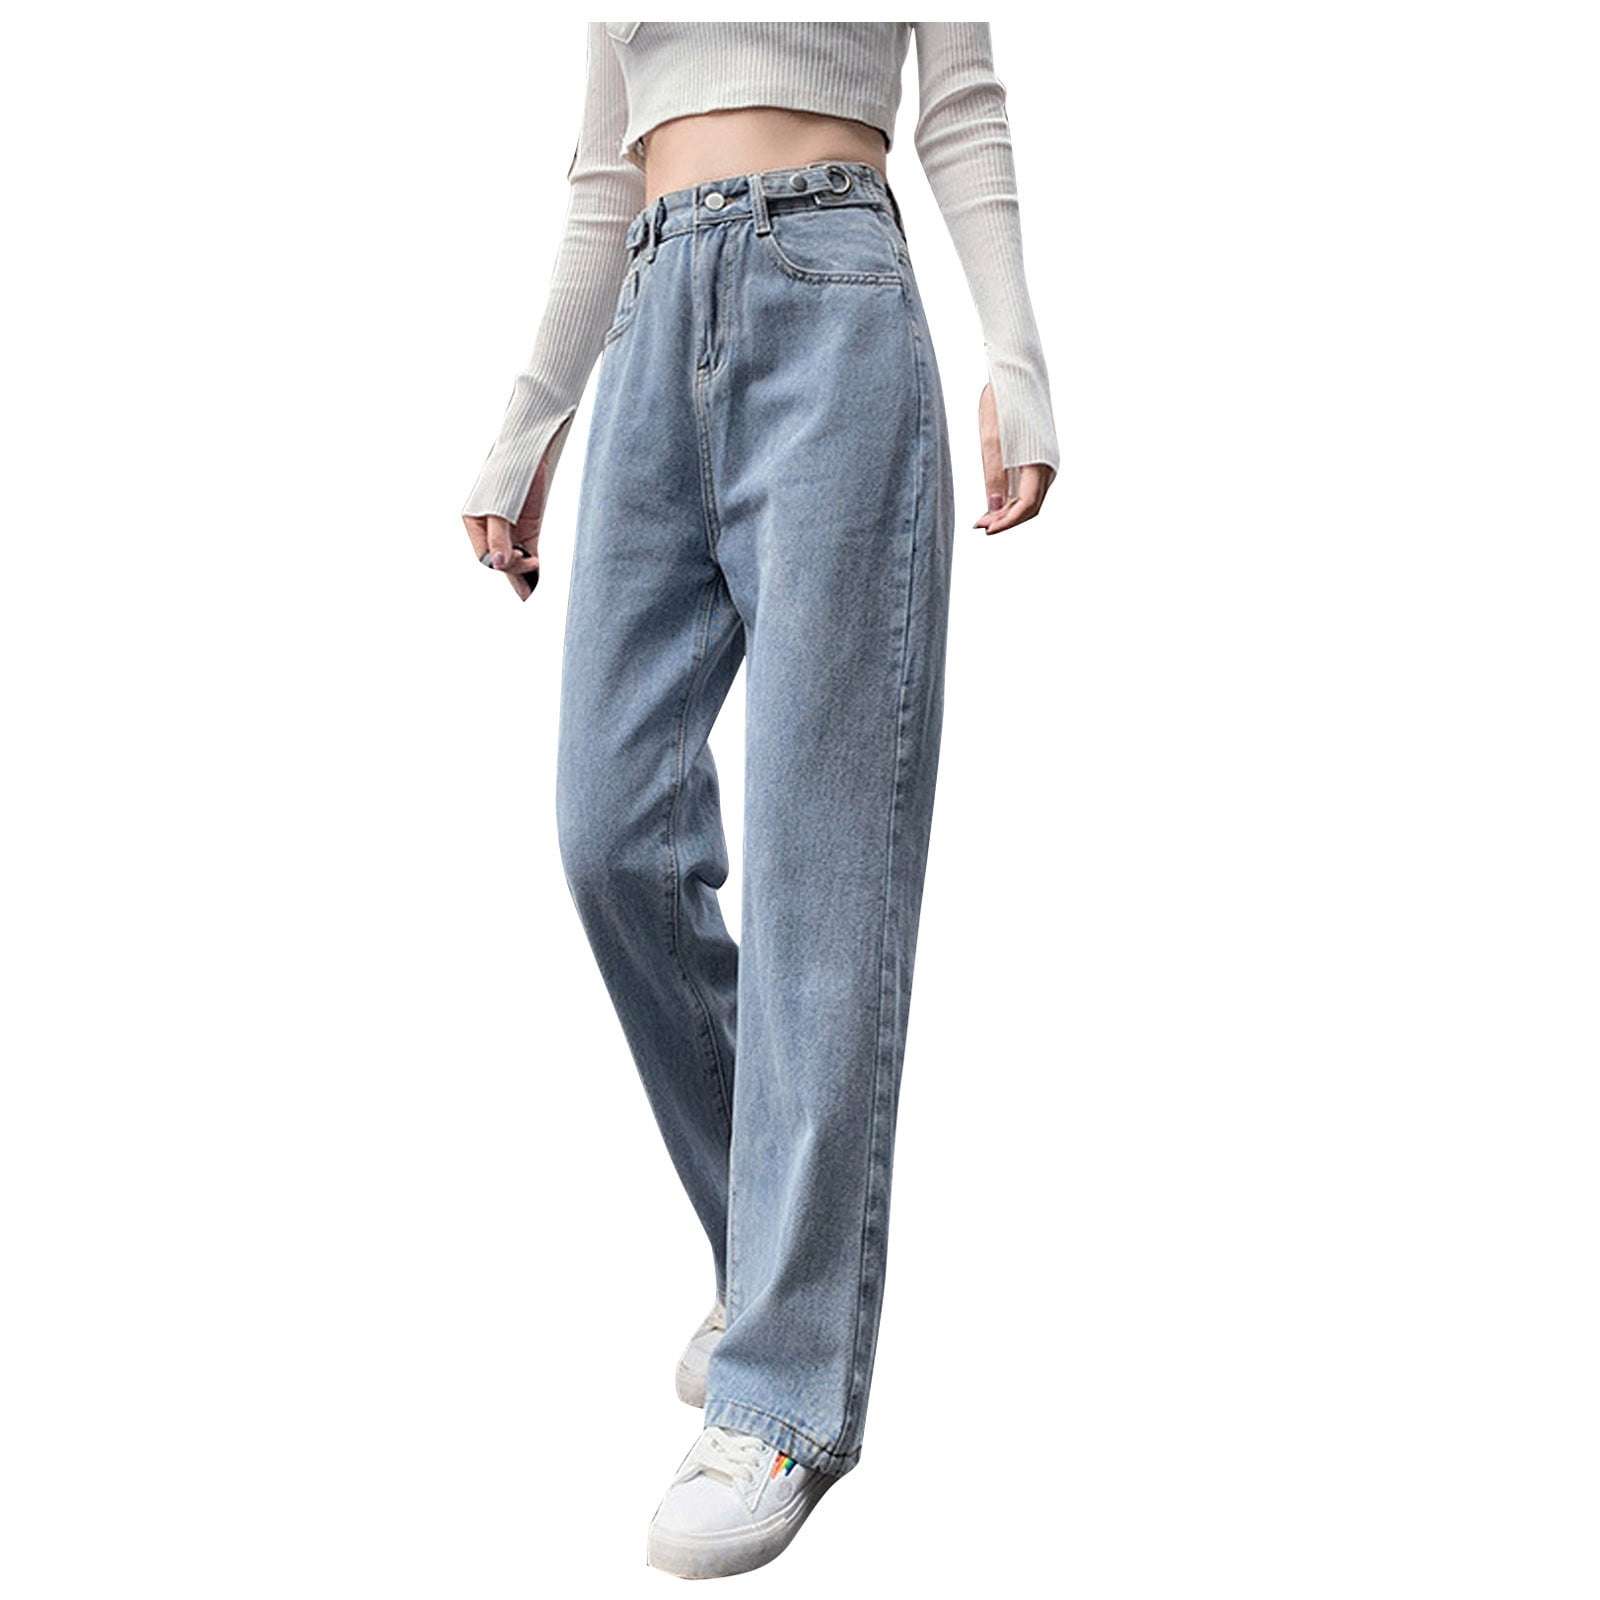 CaComMARK PI time and tru Women's Pants Clearance Women's Casual Hight ...